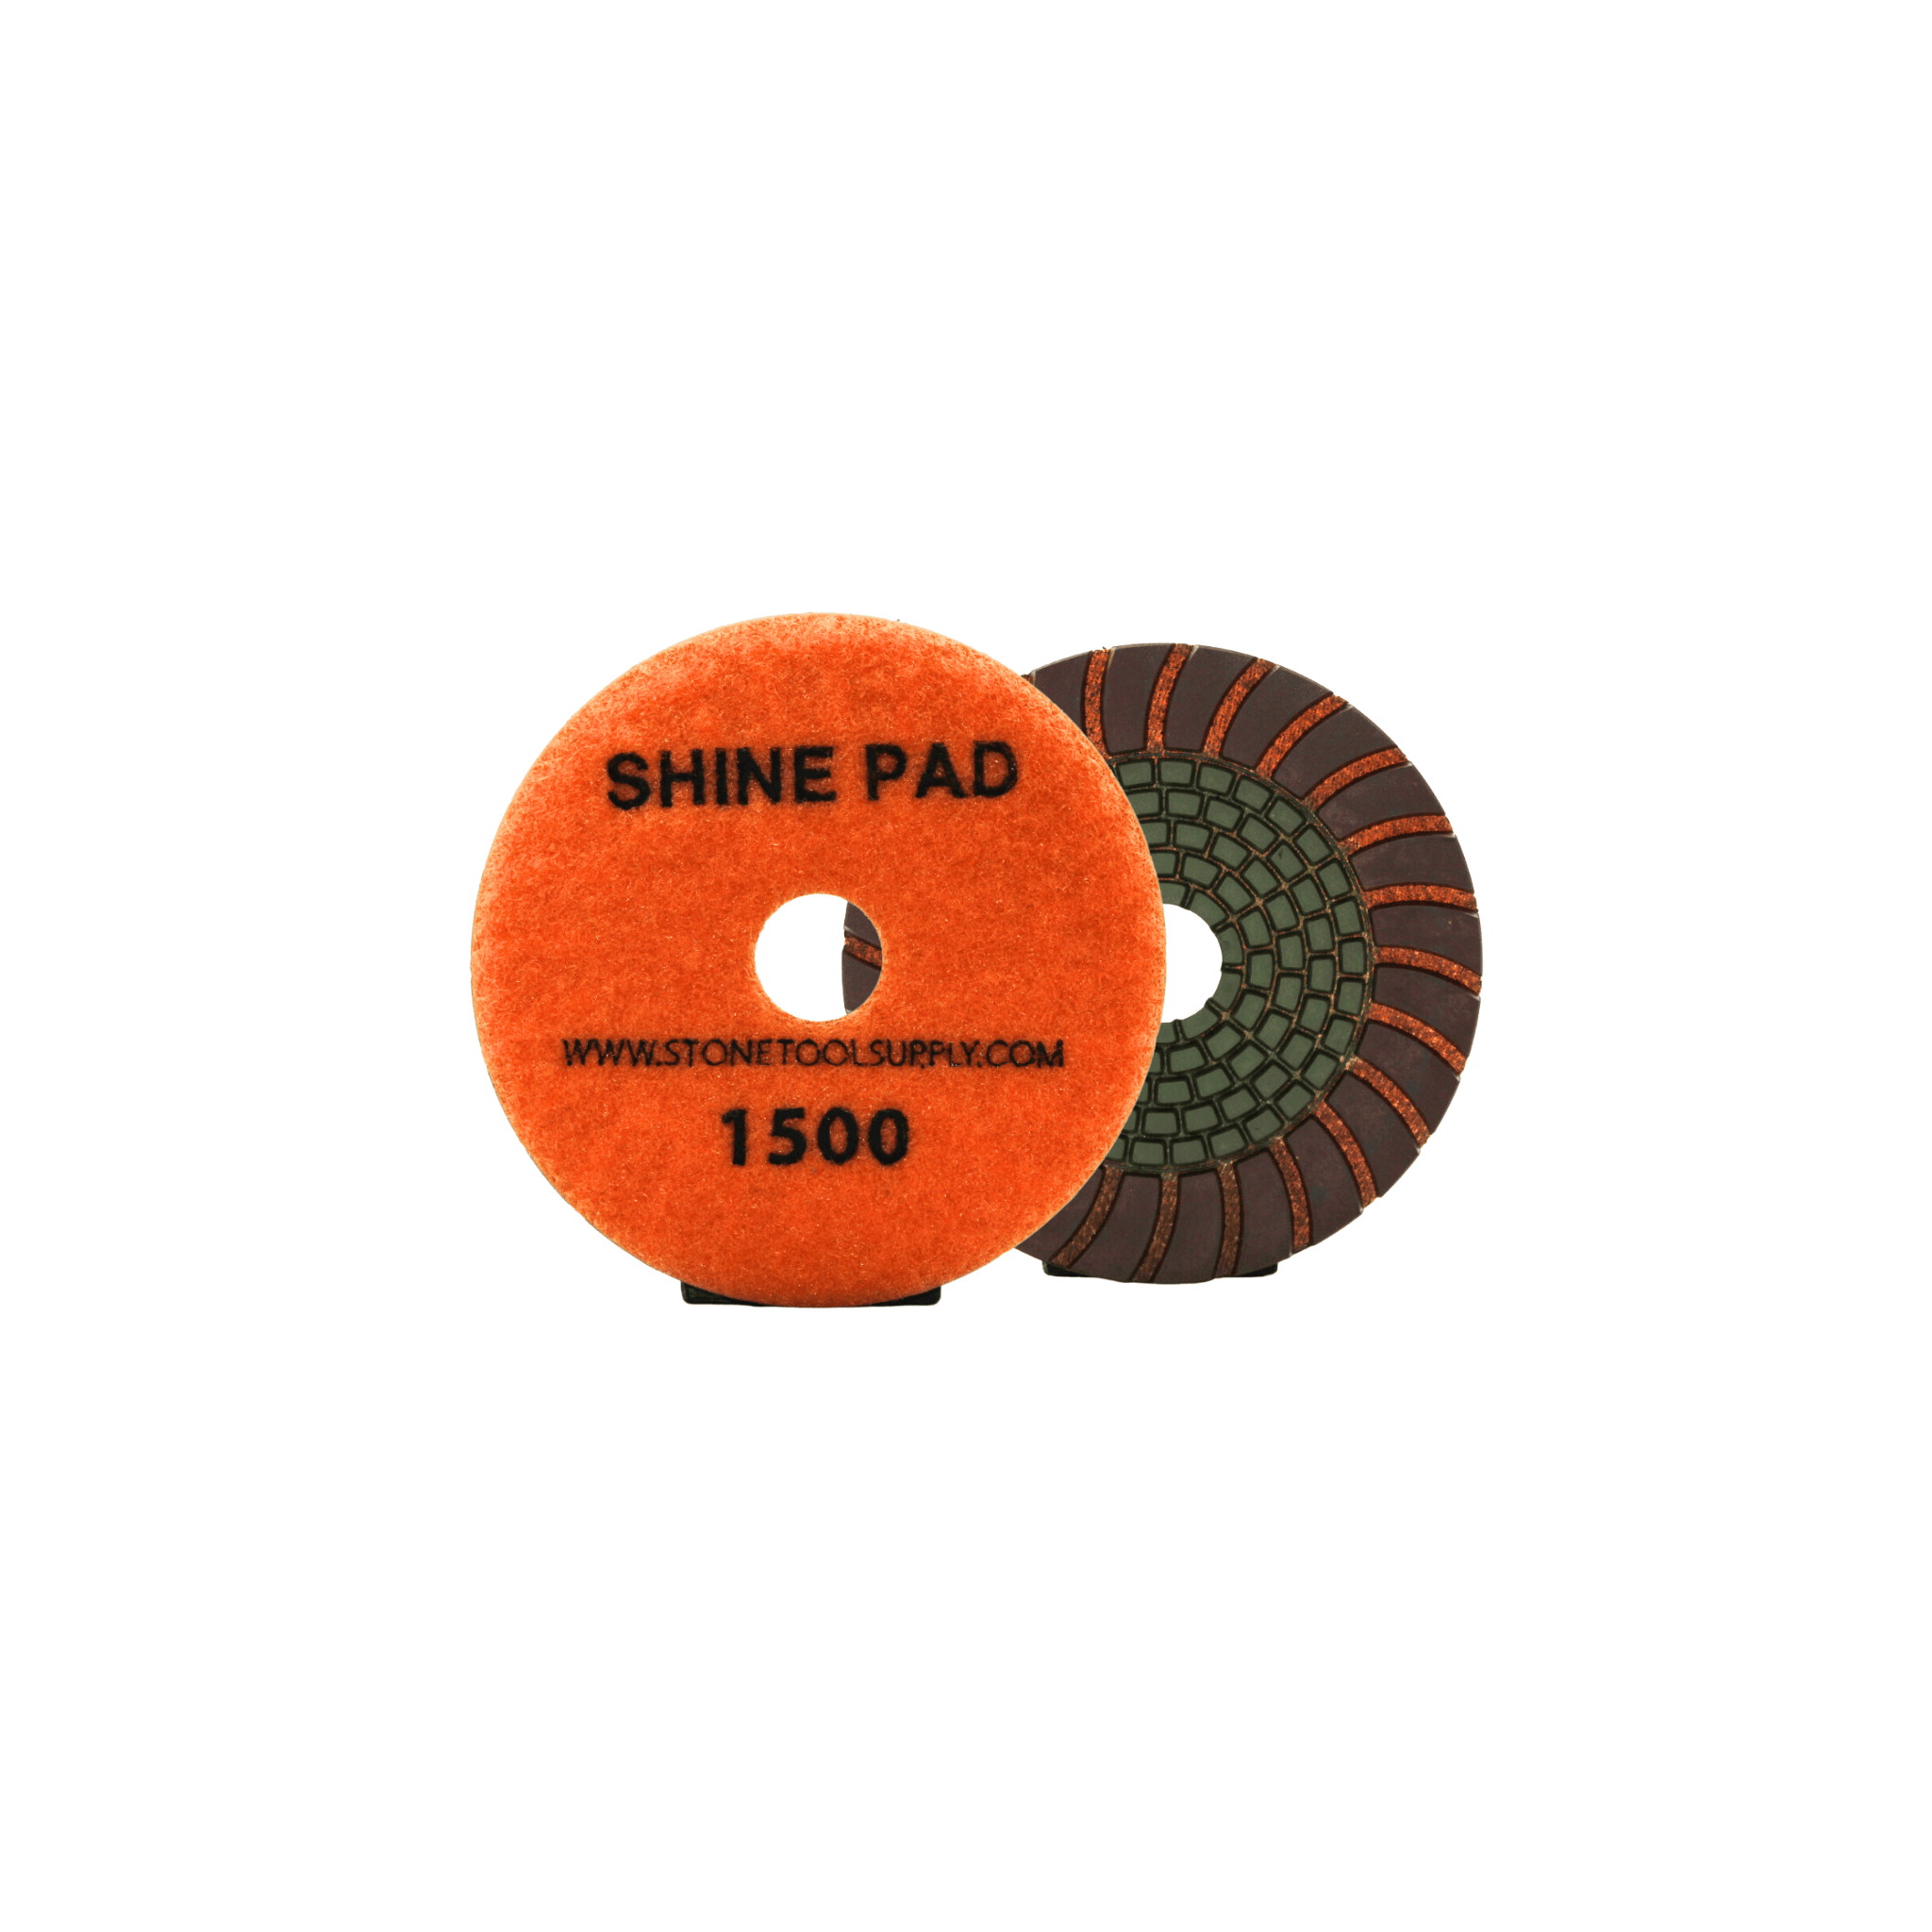 Copper and Resin Bonded 'Shine' Pad 4" #1500 - Direct Stone Tool Supply, Inc